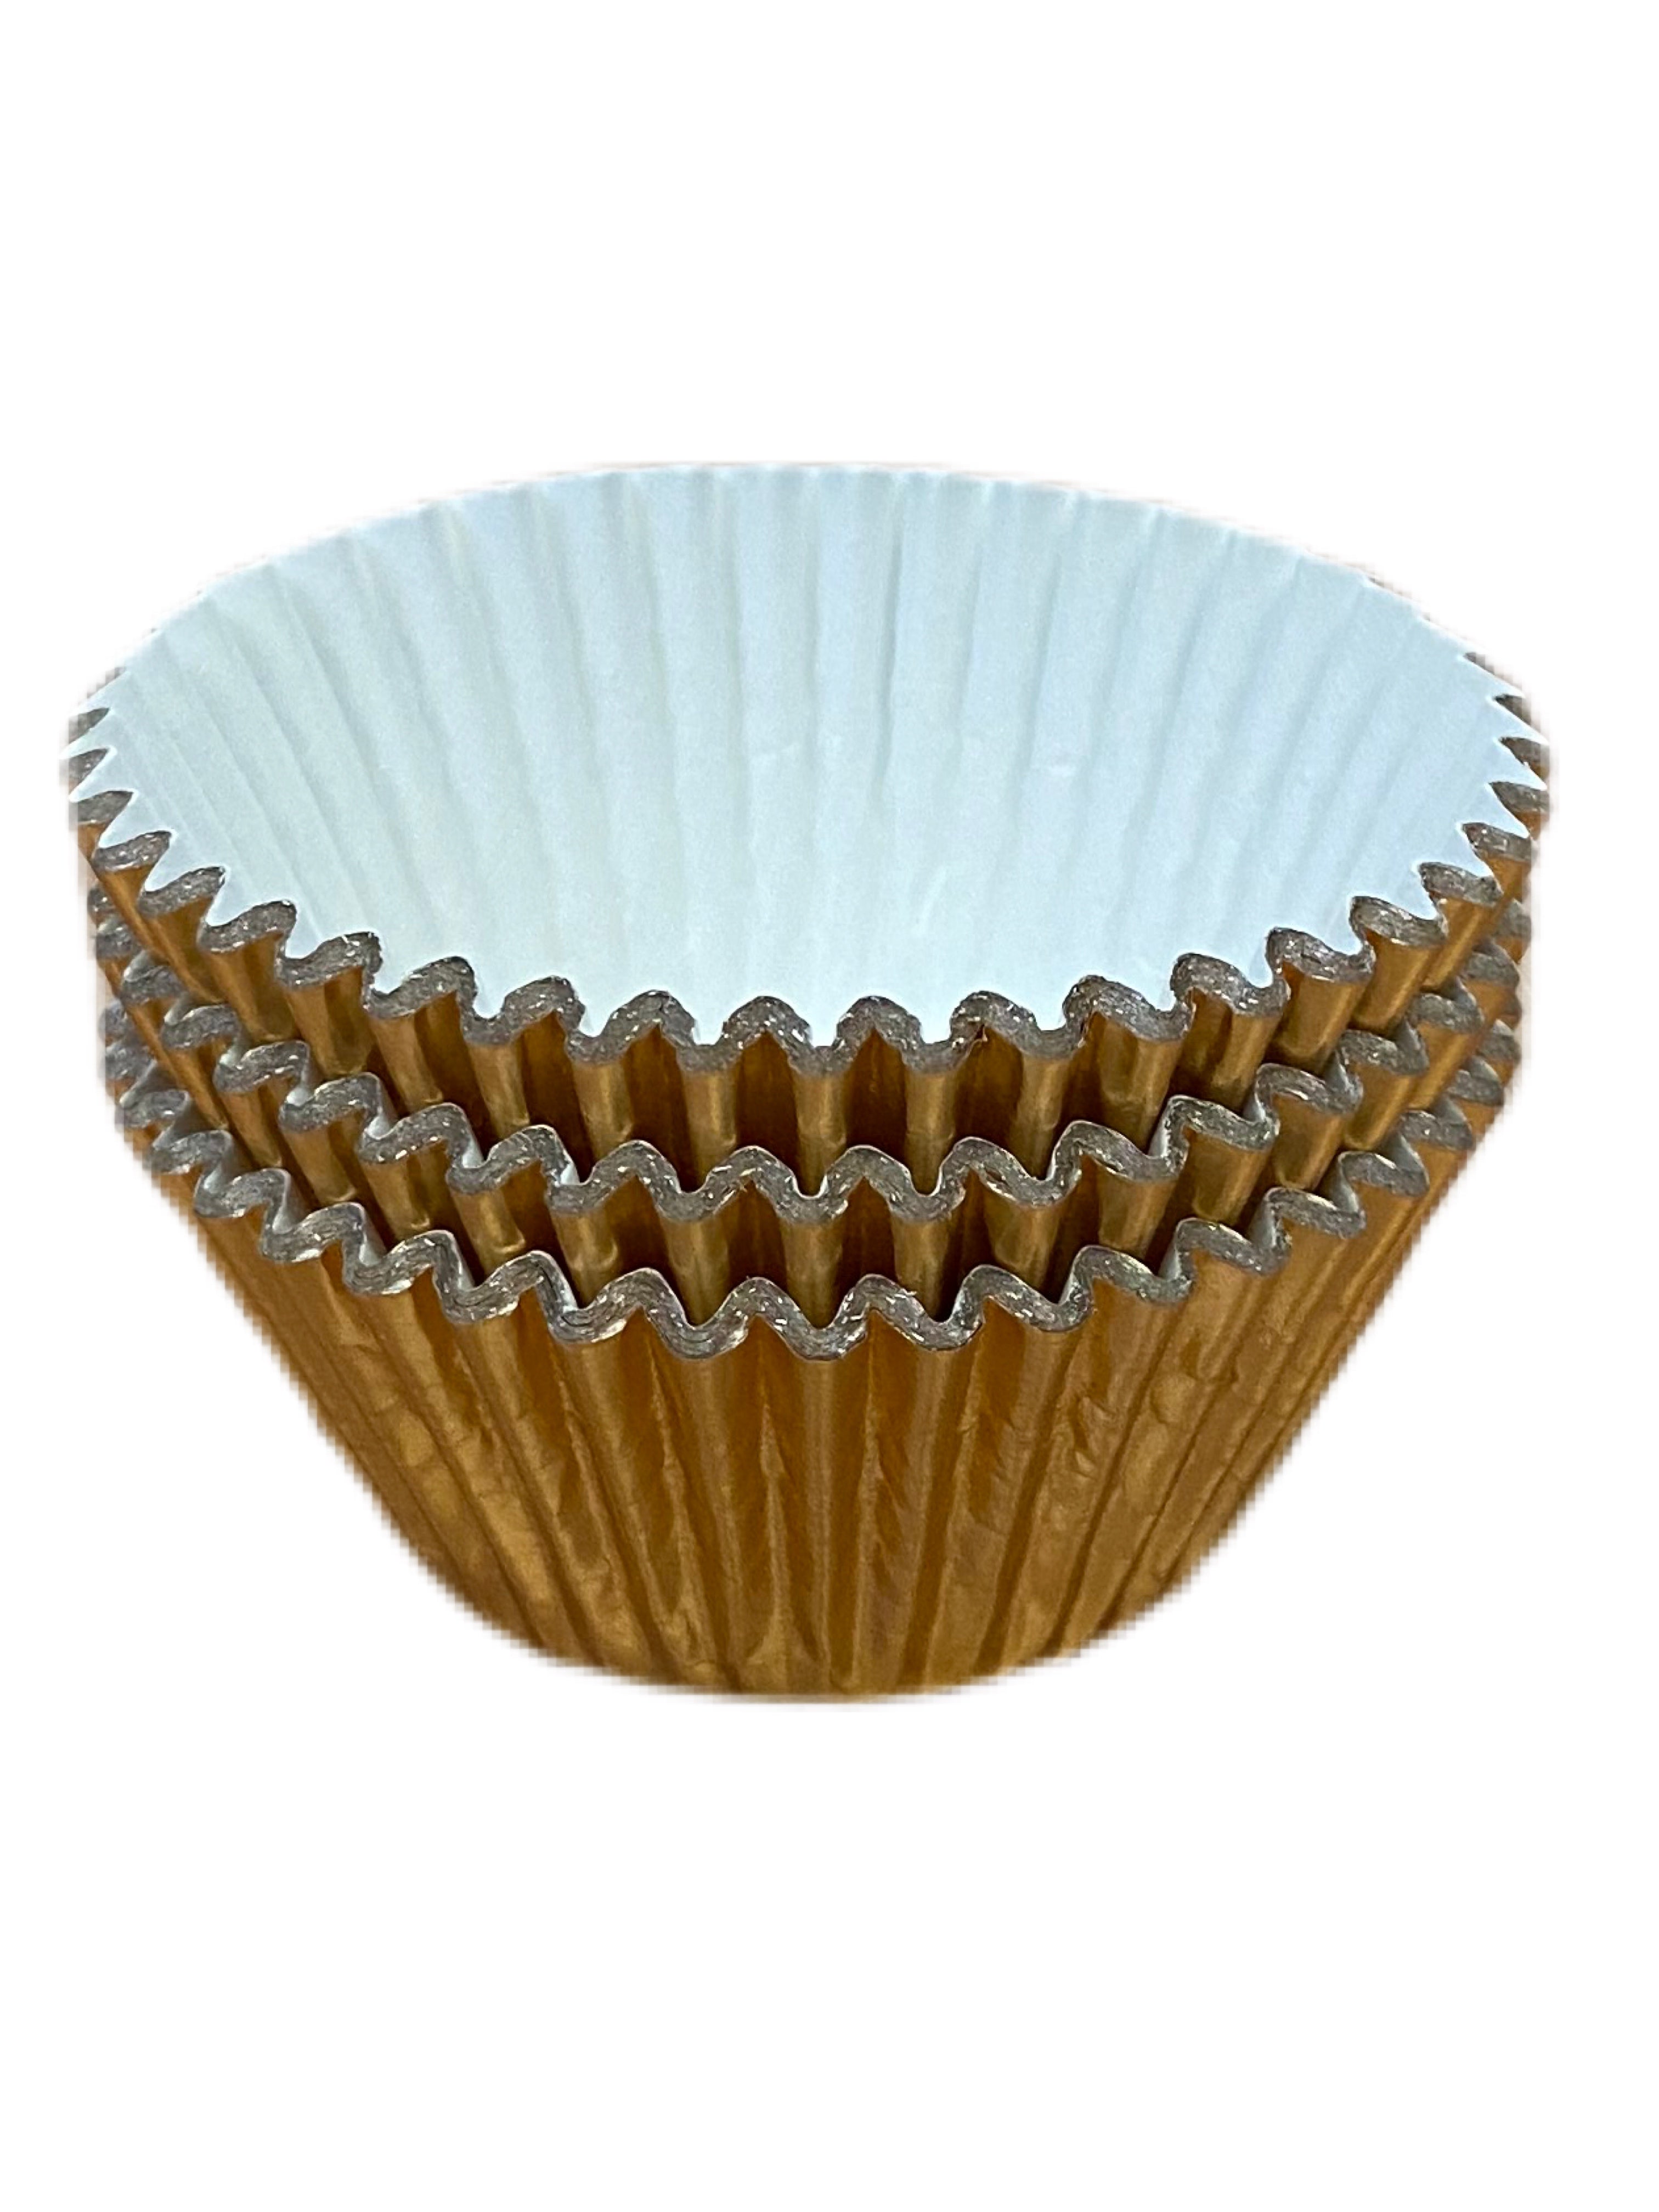 Gold Foil Cupcake / Muffin Baking Cases Pack of Approx 36 Kates Cupboard Newbridge